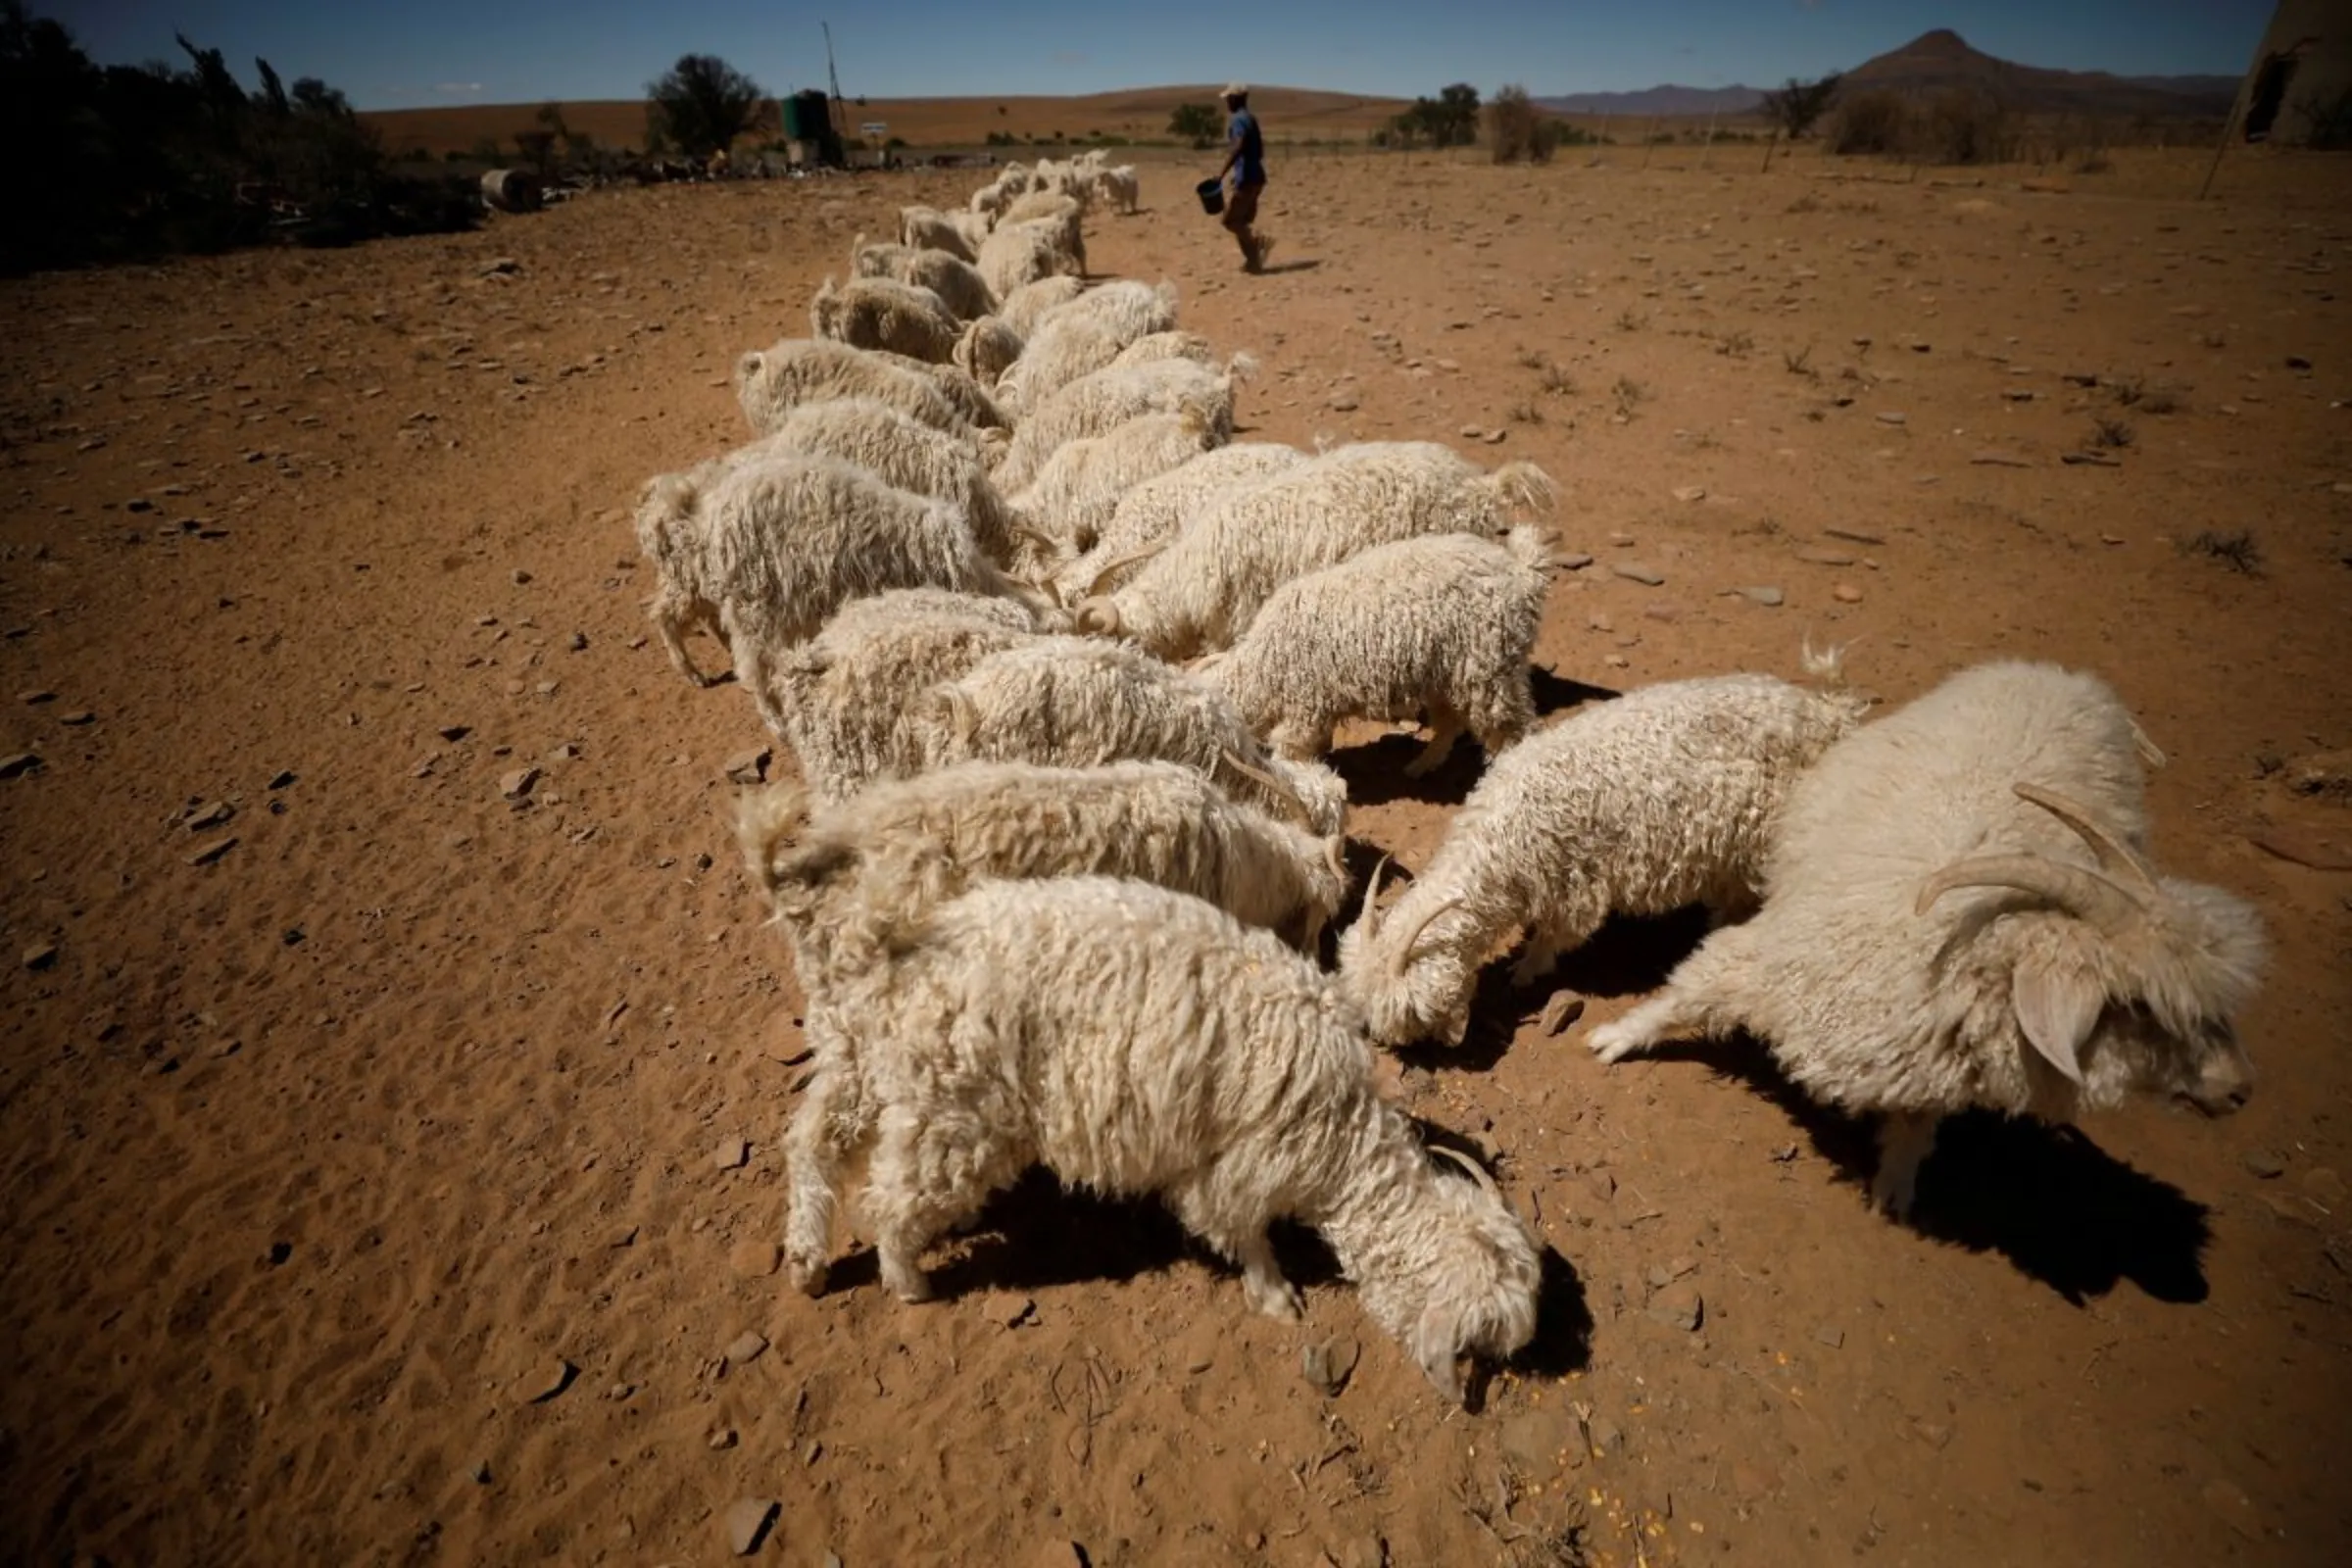 A farm worker distributes a line of feed to Angora goats near drought-stricken Graaff-Reinet, South Africa, November 16, 2019